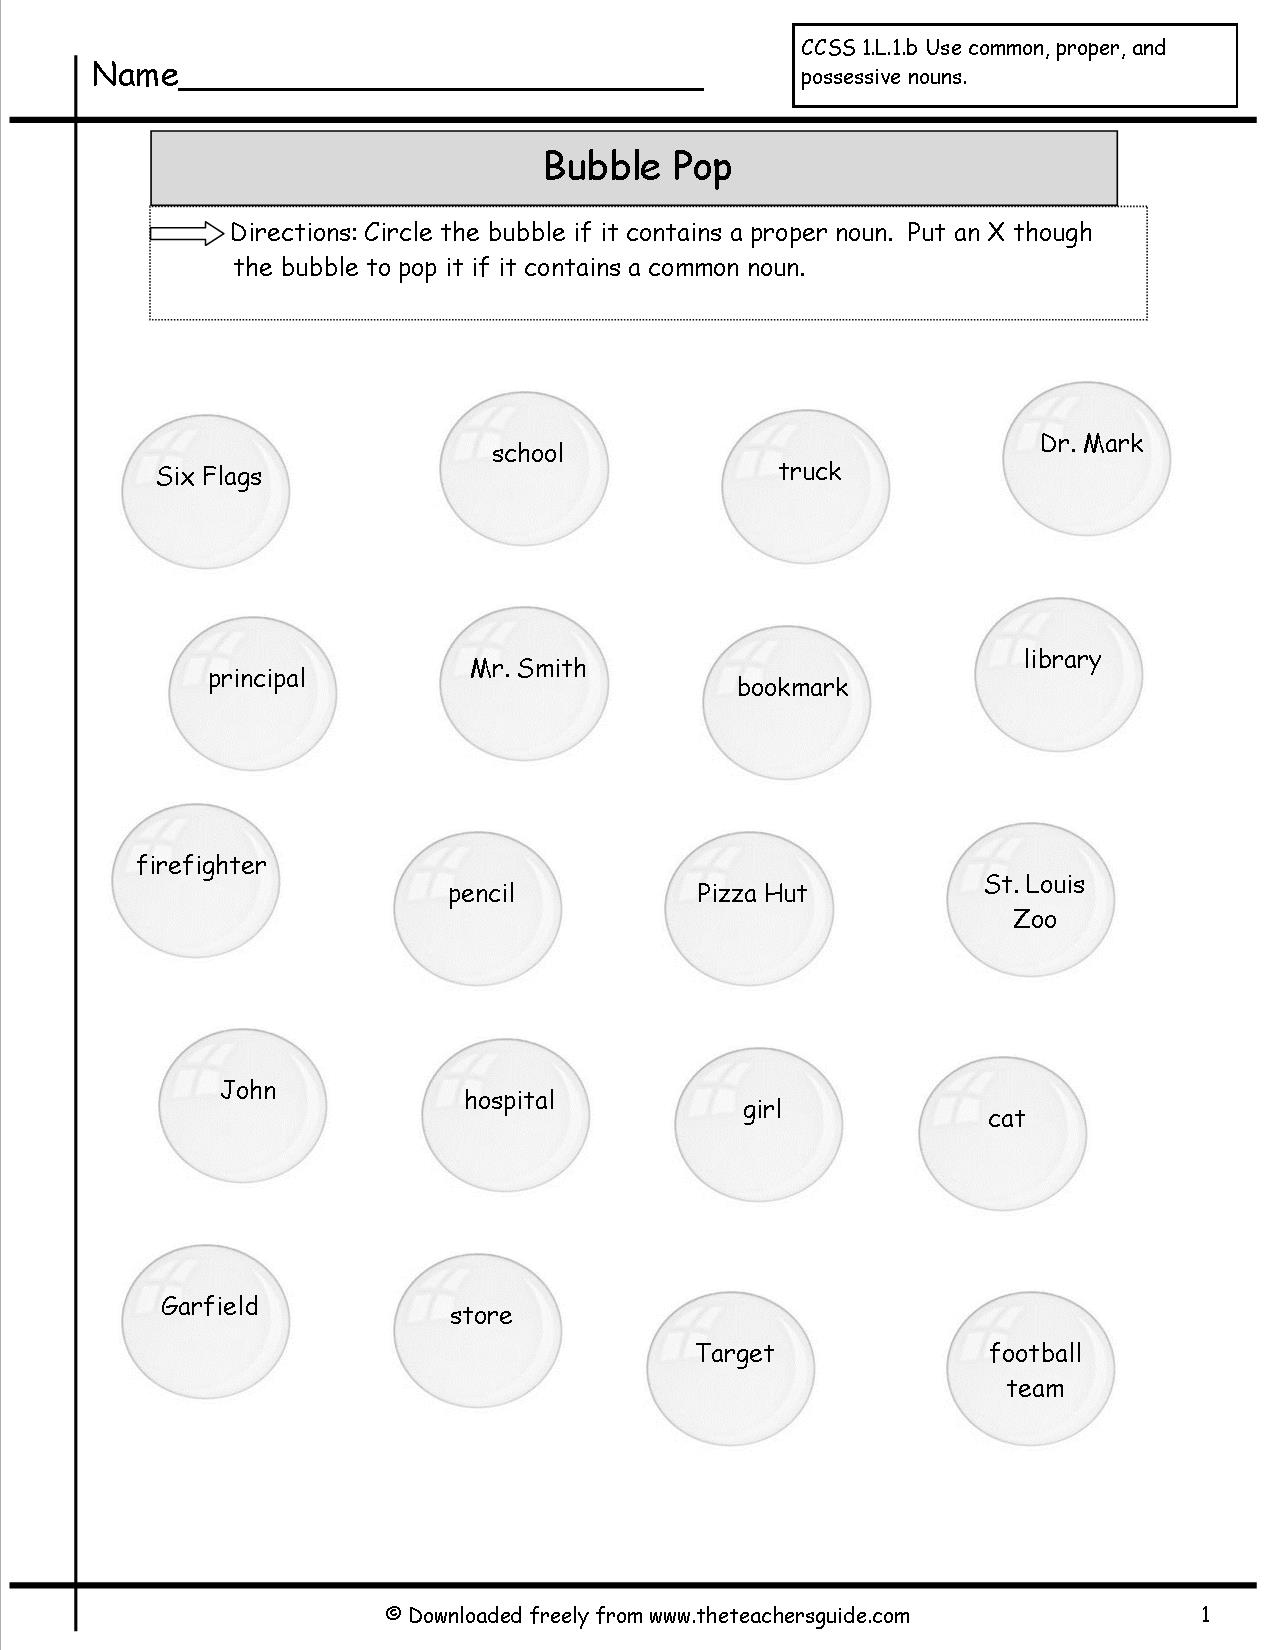 Common and Proper Nouns Worksheets 1st Grade Image